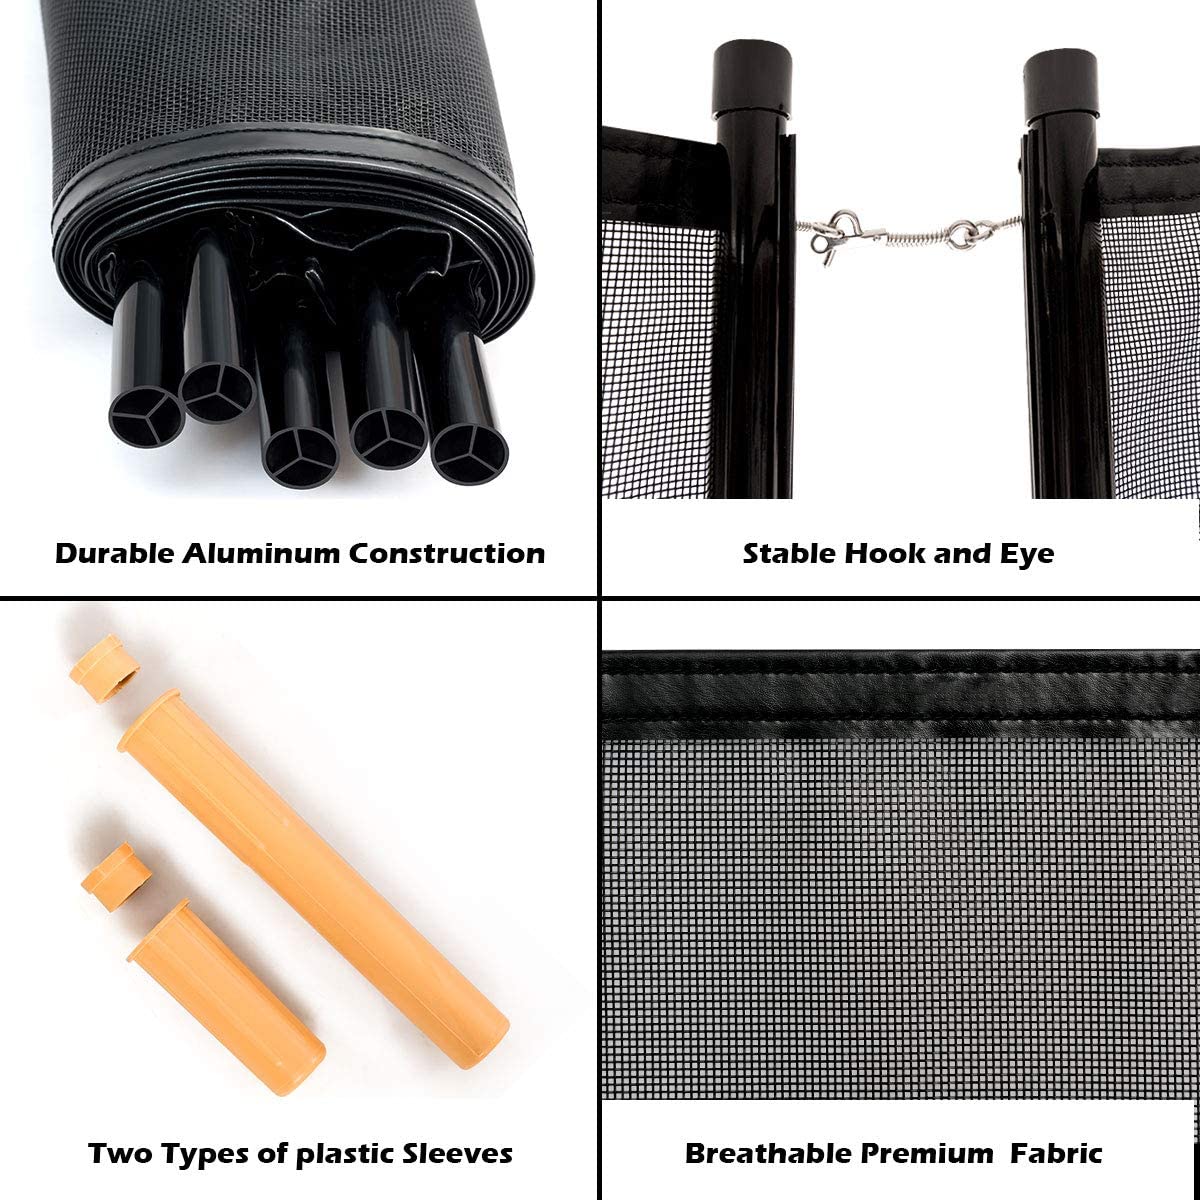 4Foot X12Foot Kit Safety Mesh Barrier W/ 2 Size Sleeves Removable Kids Garden Fence - Giantexus